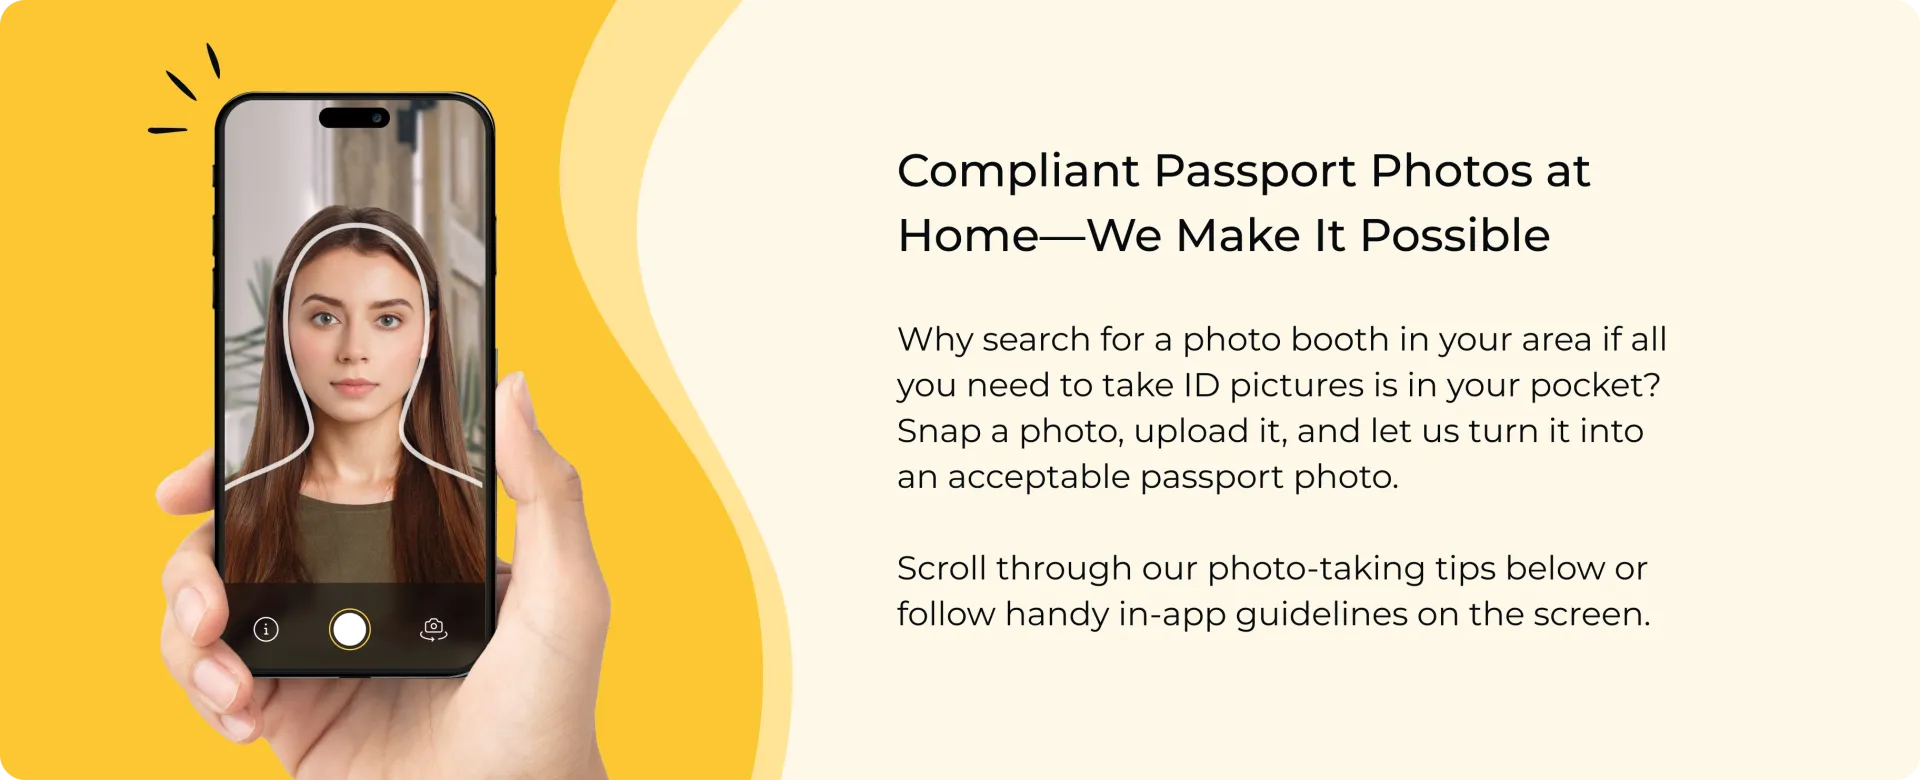 Steps explaining that you can get passport photos that meet government requirements using only a mobile app at home